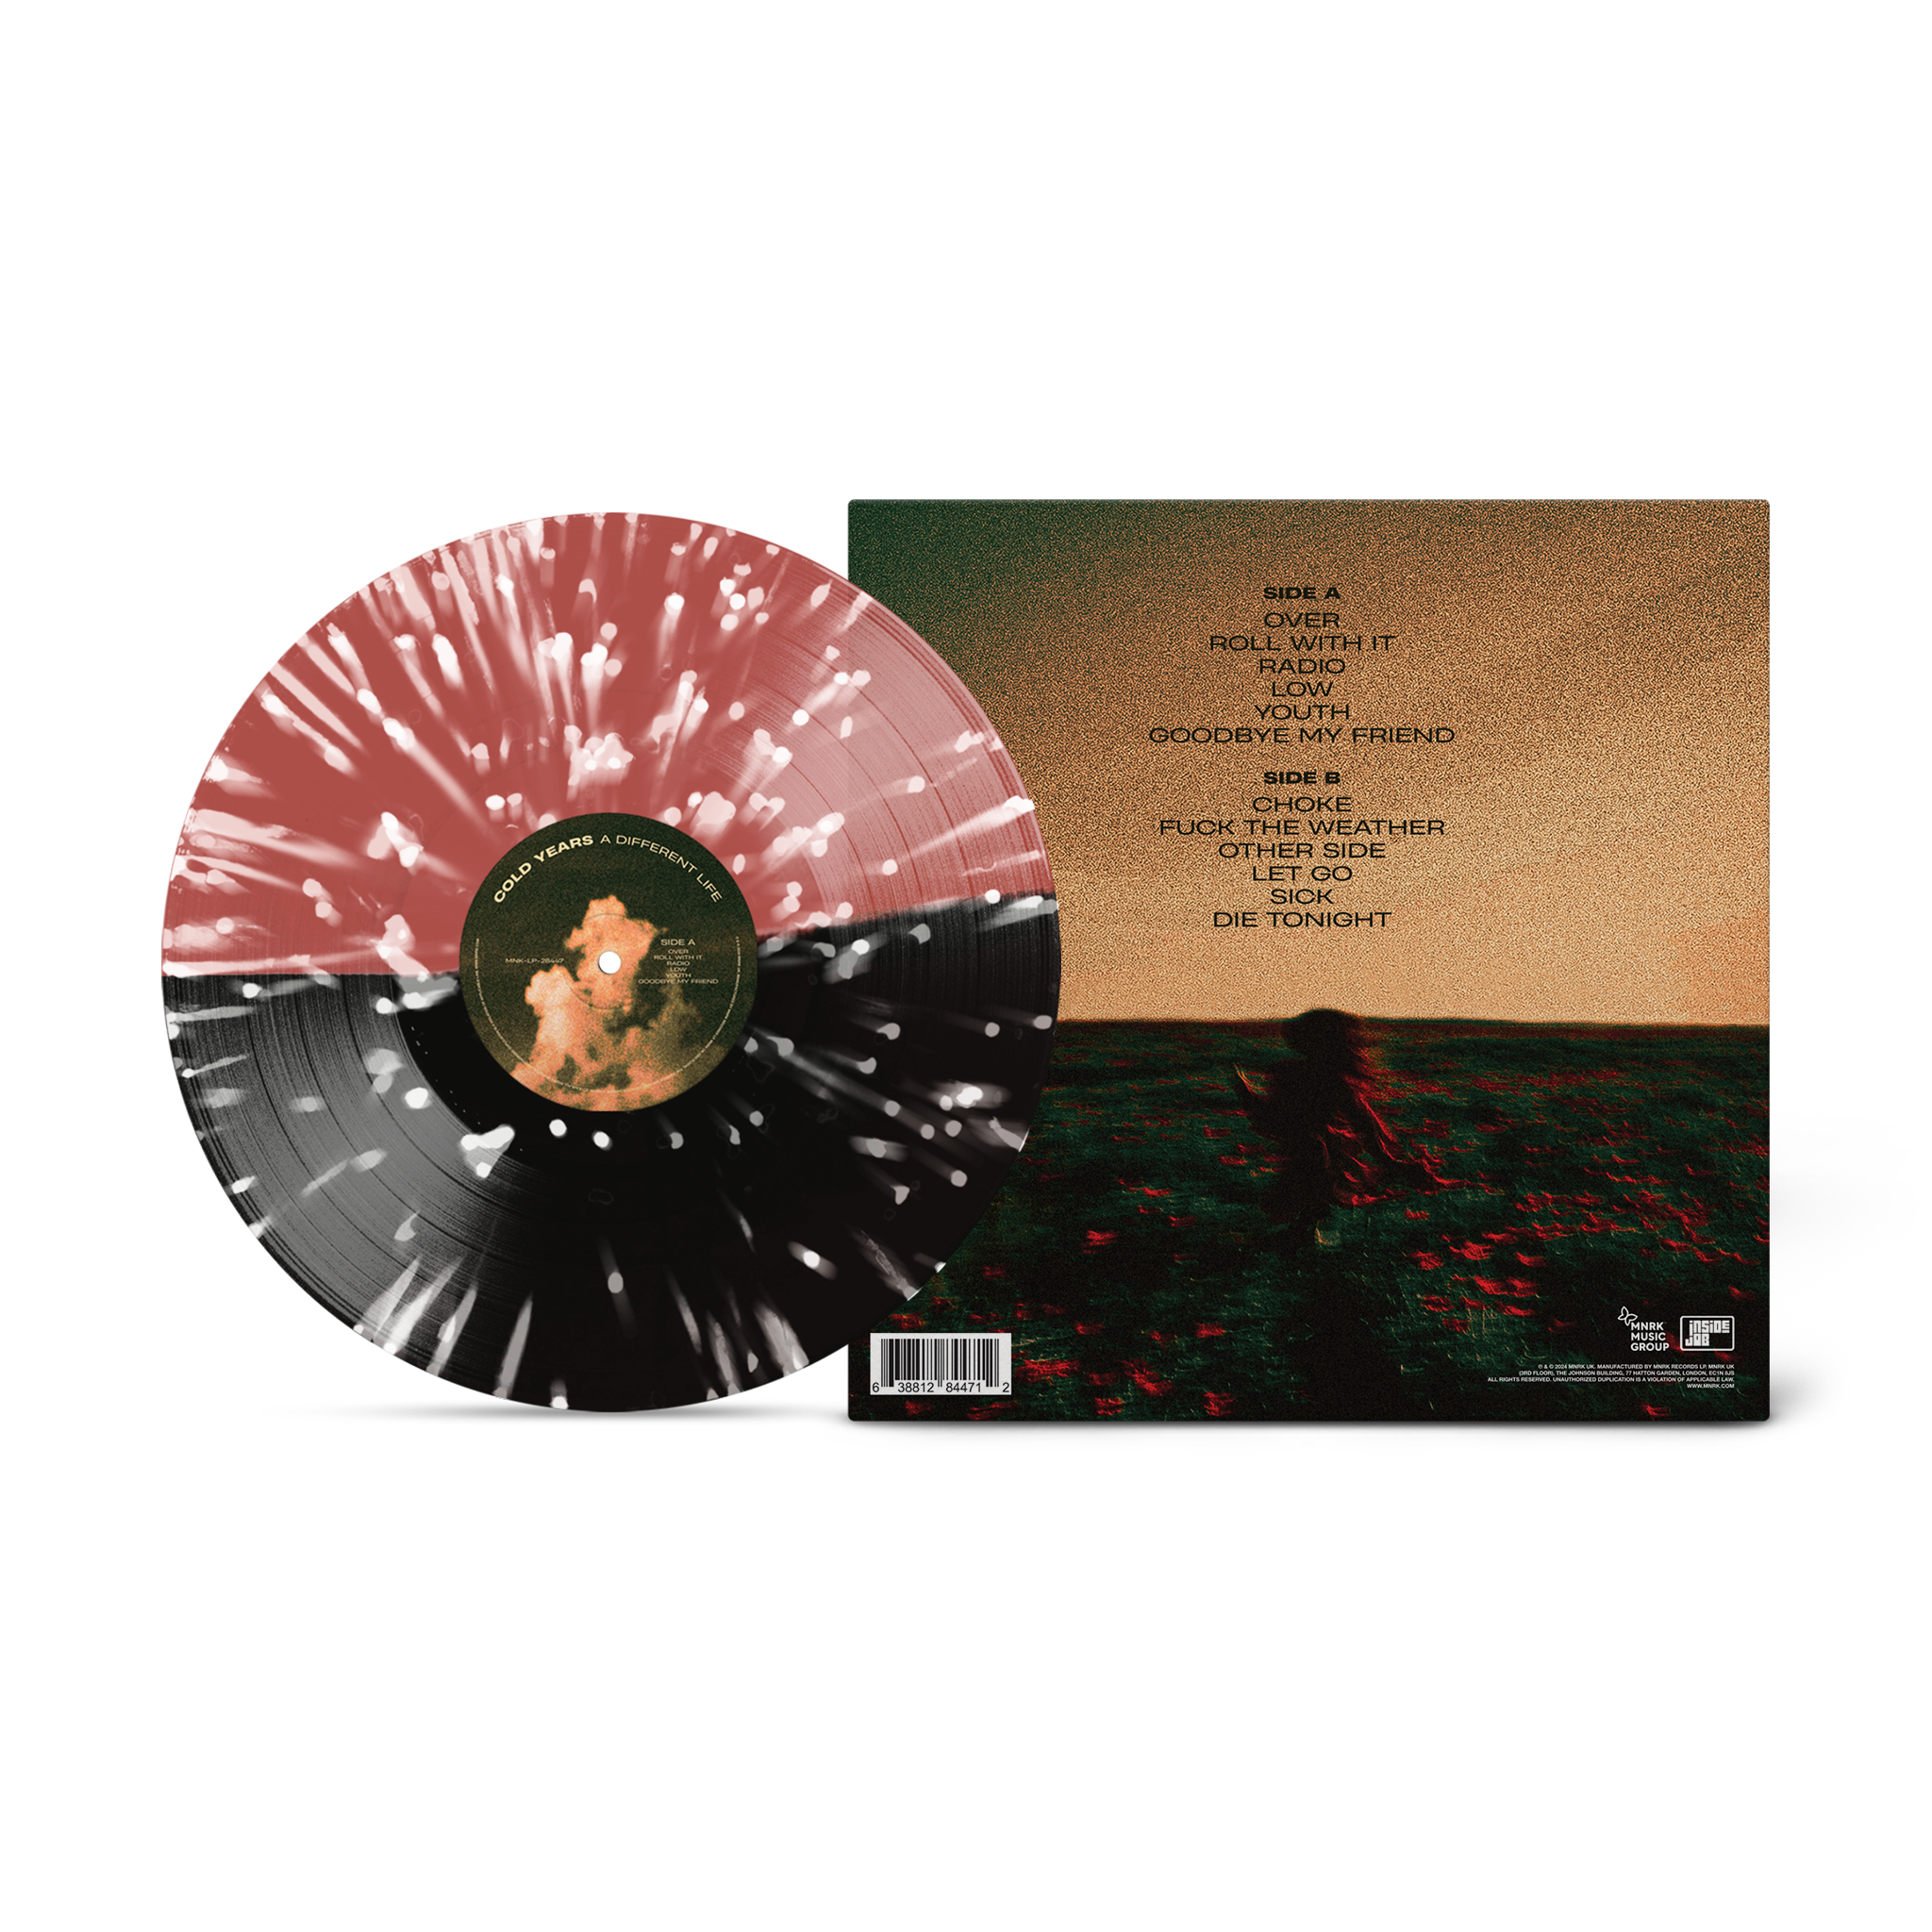 Cold Years – A Different Life Splatter Vinyl